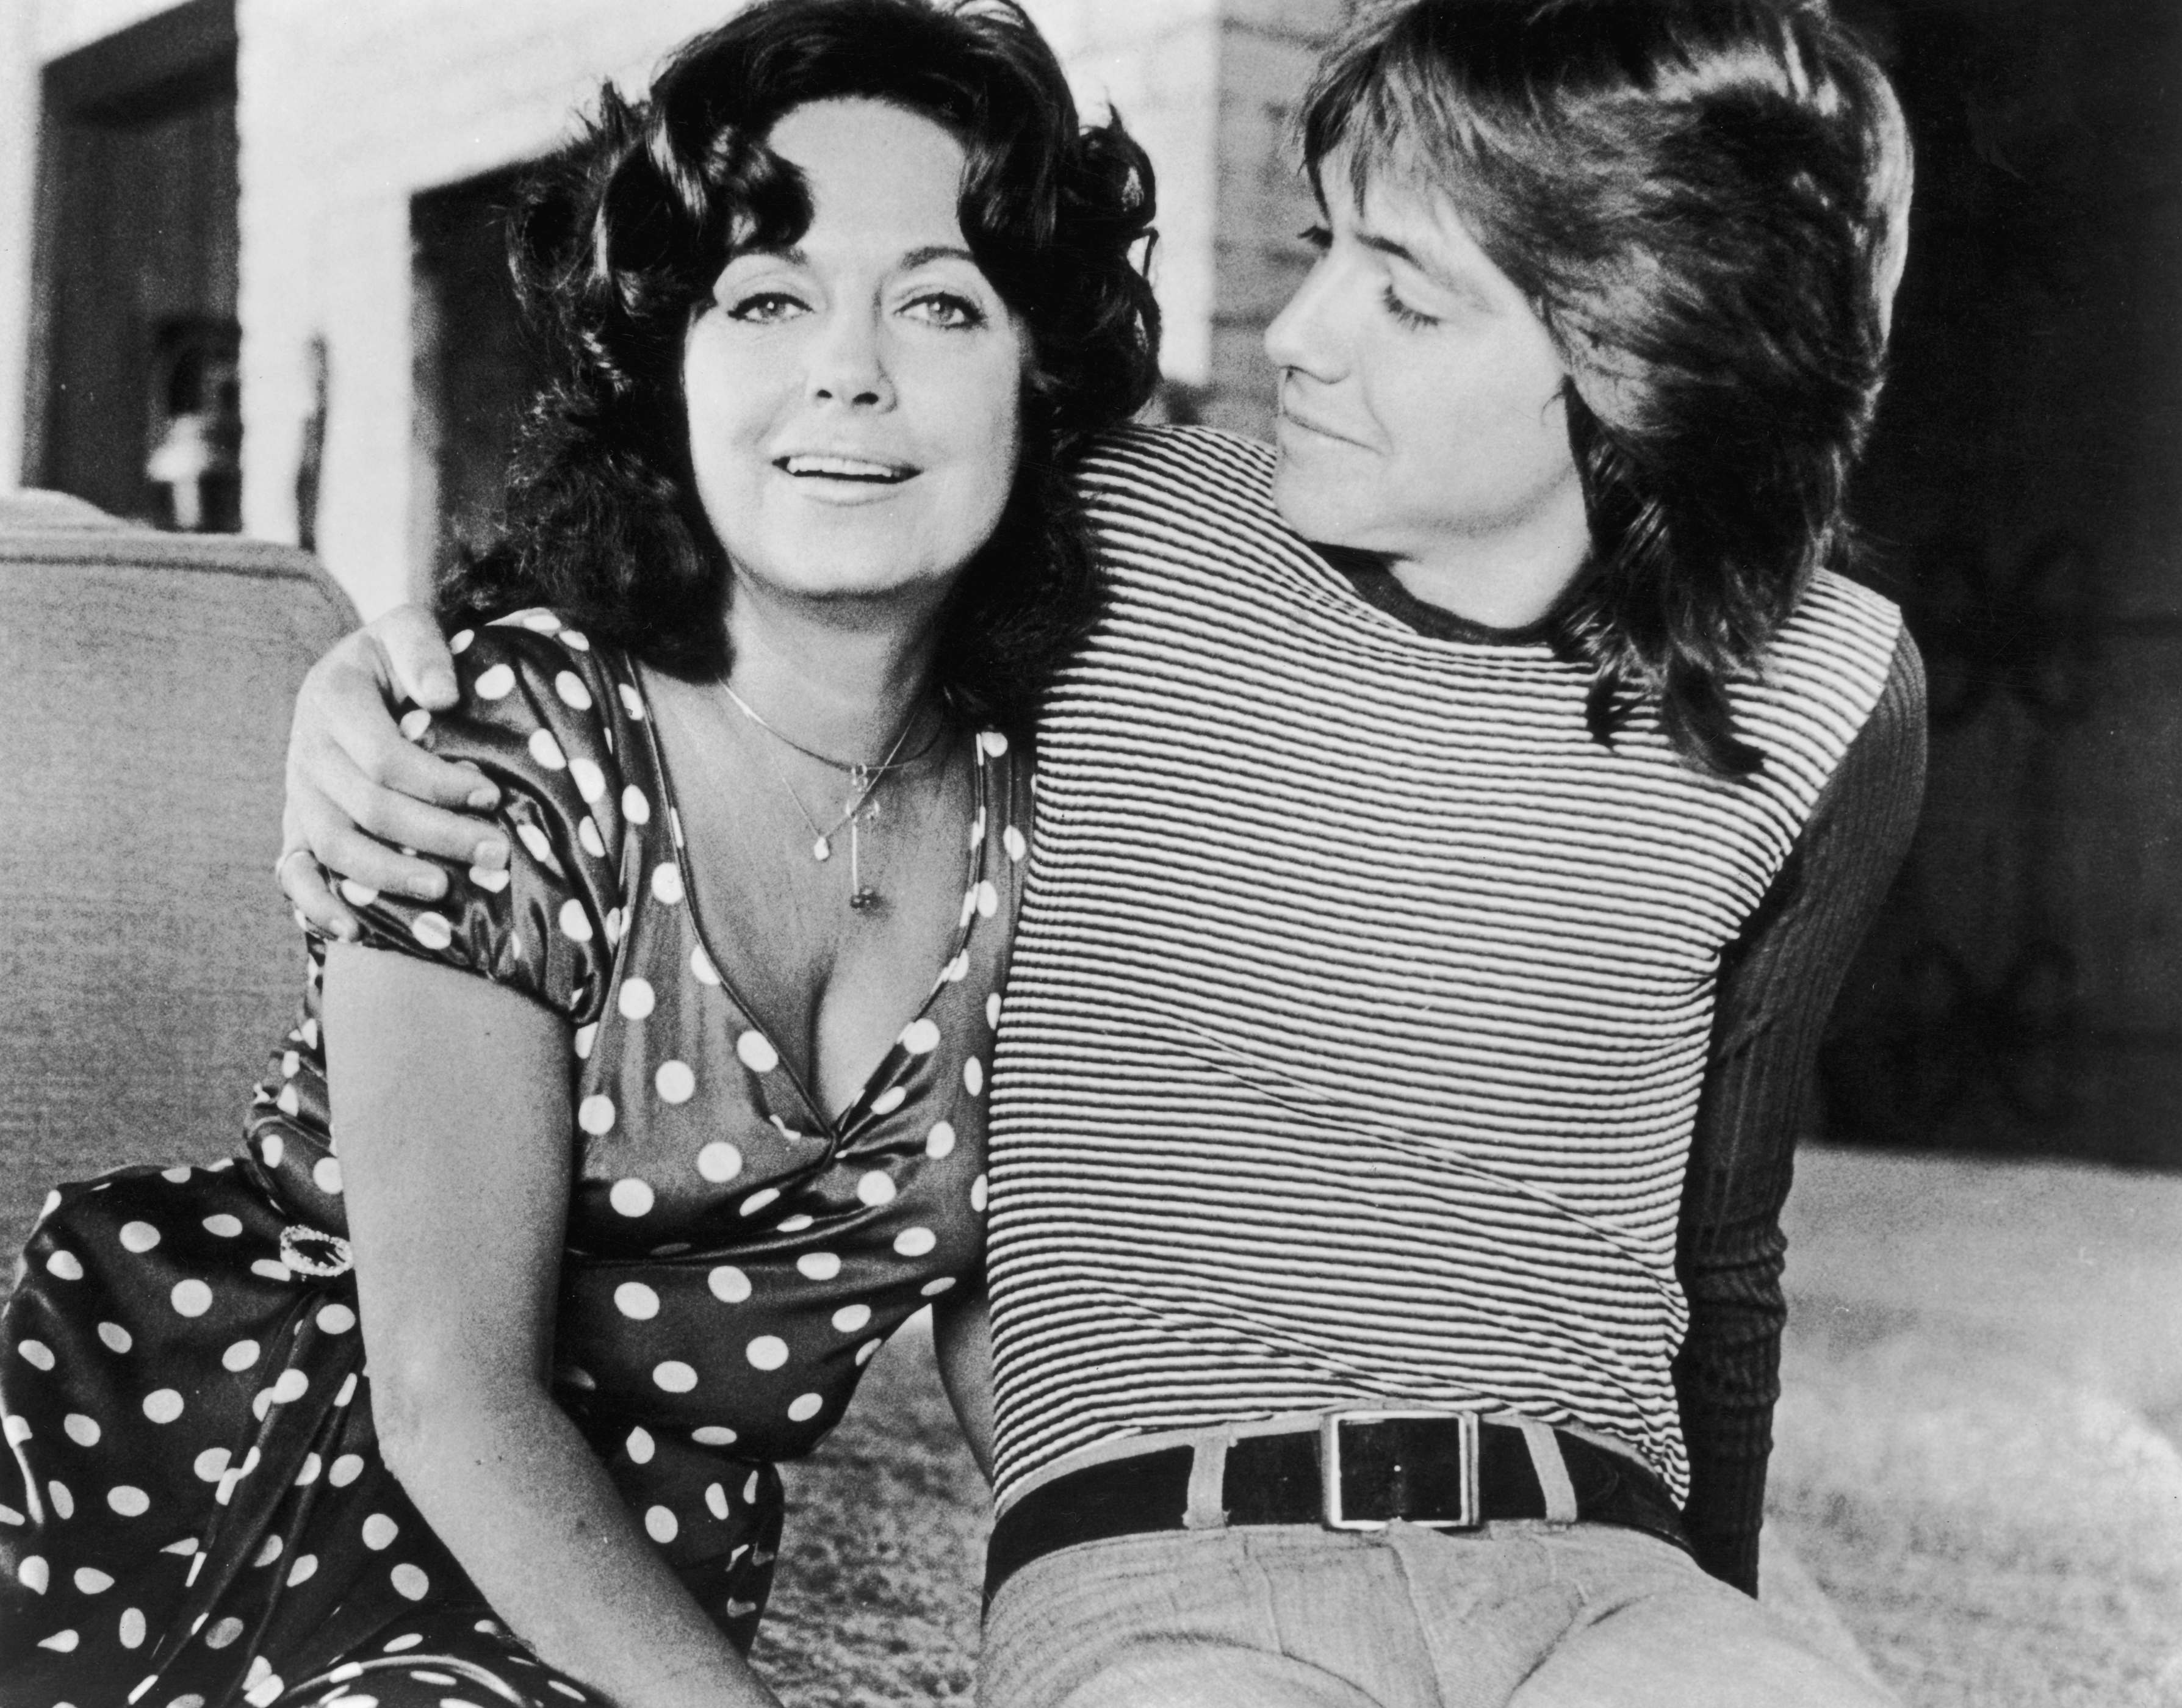 American singer and actor David Cassidy sits with his arm around his mother, actor Evelyn Ward | Source: Getty Images